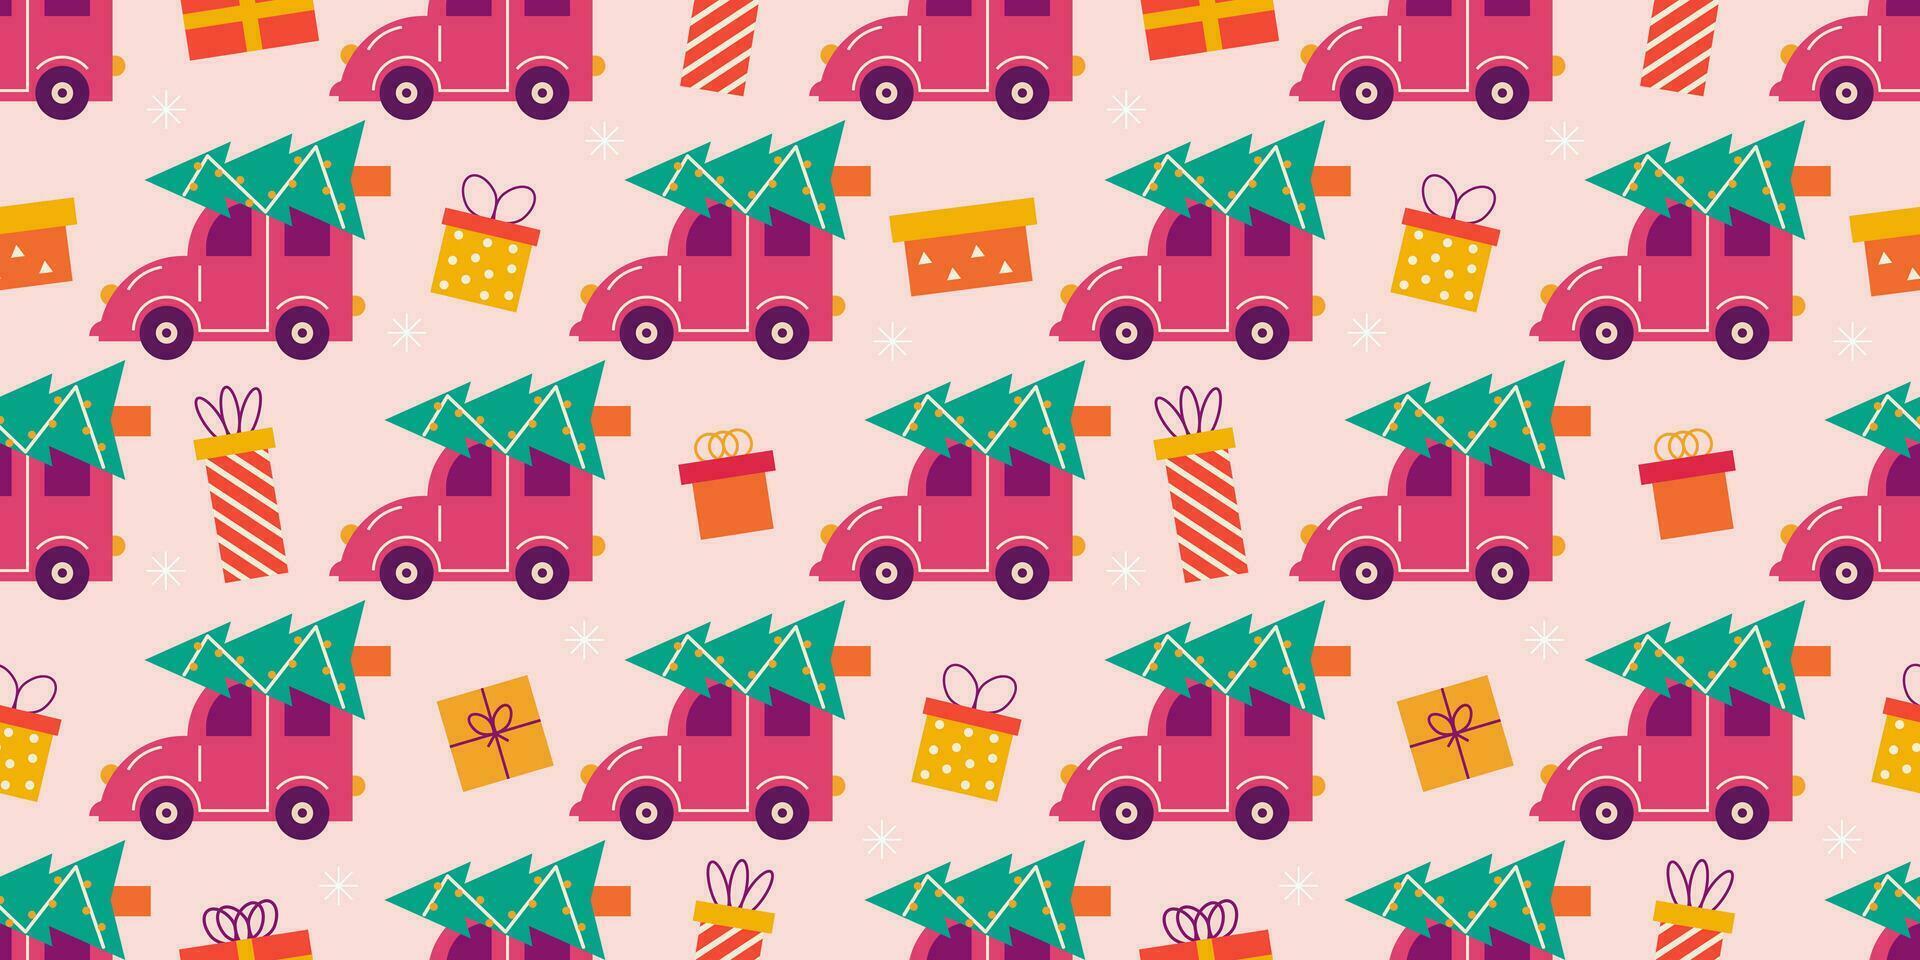 Car with Christmas tree, gifts and snowflakes. Vector seamless pattern, festive background